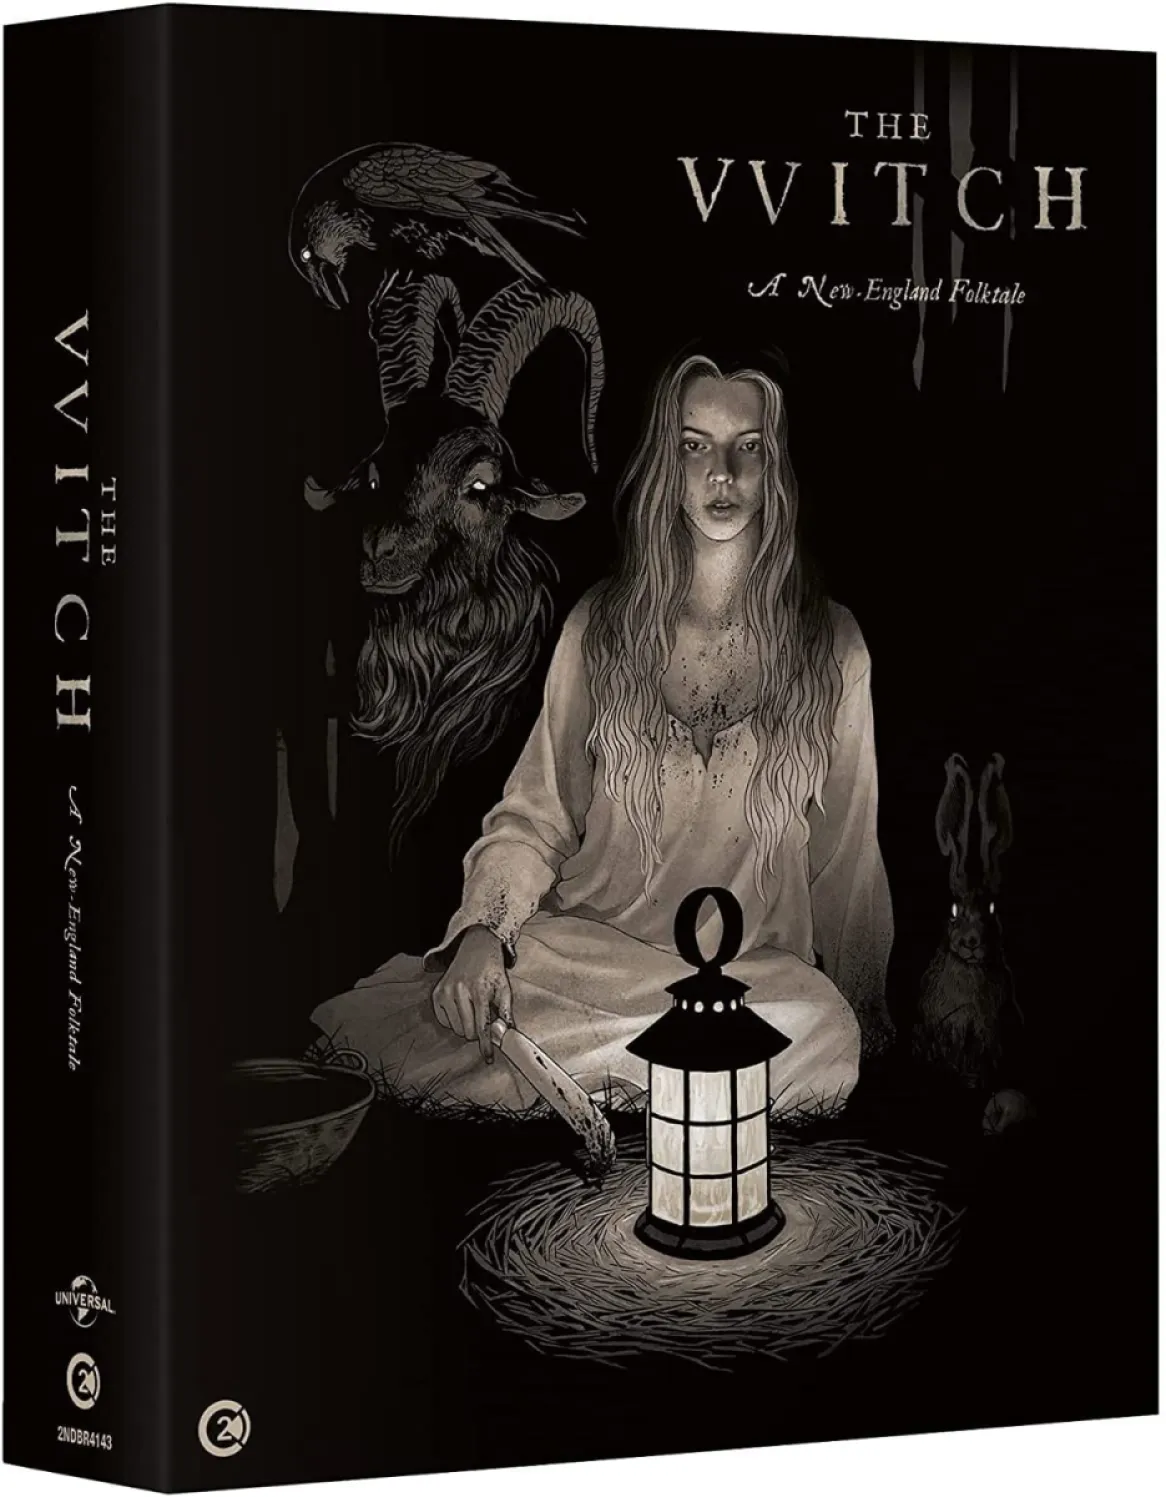 'The Witch' limited edition Blu-ray